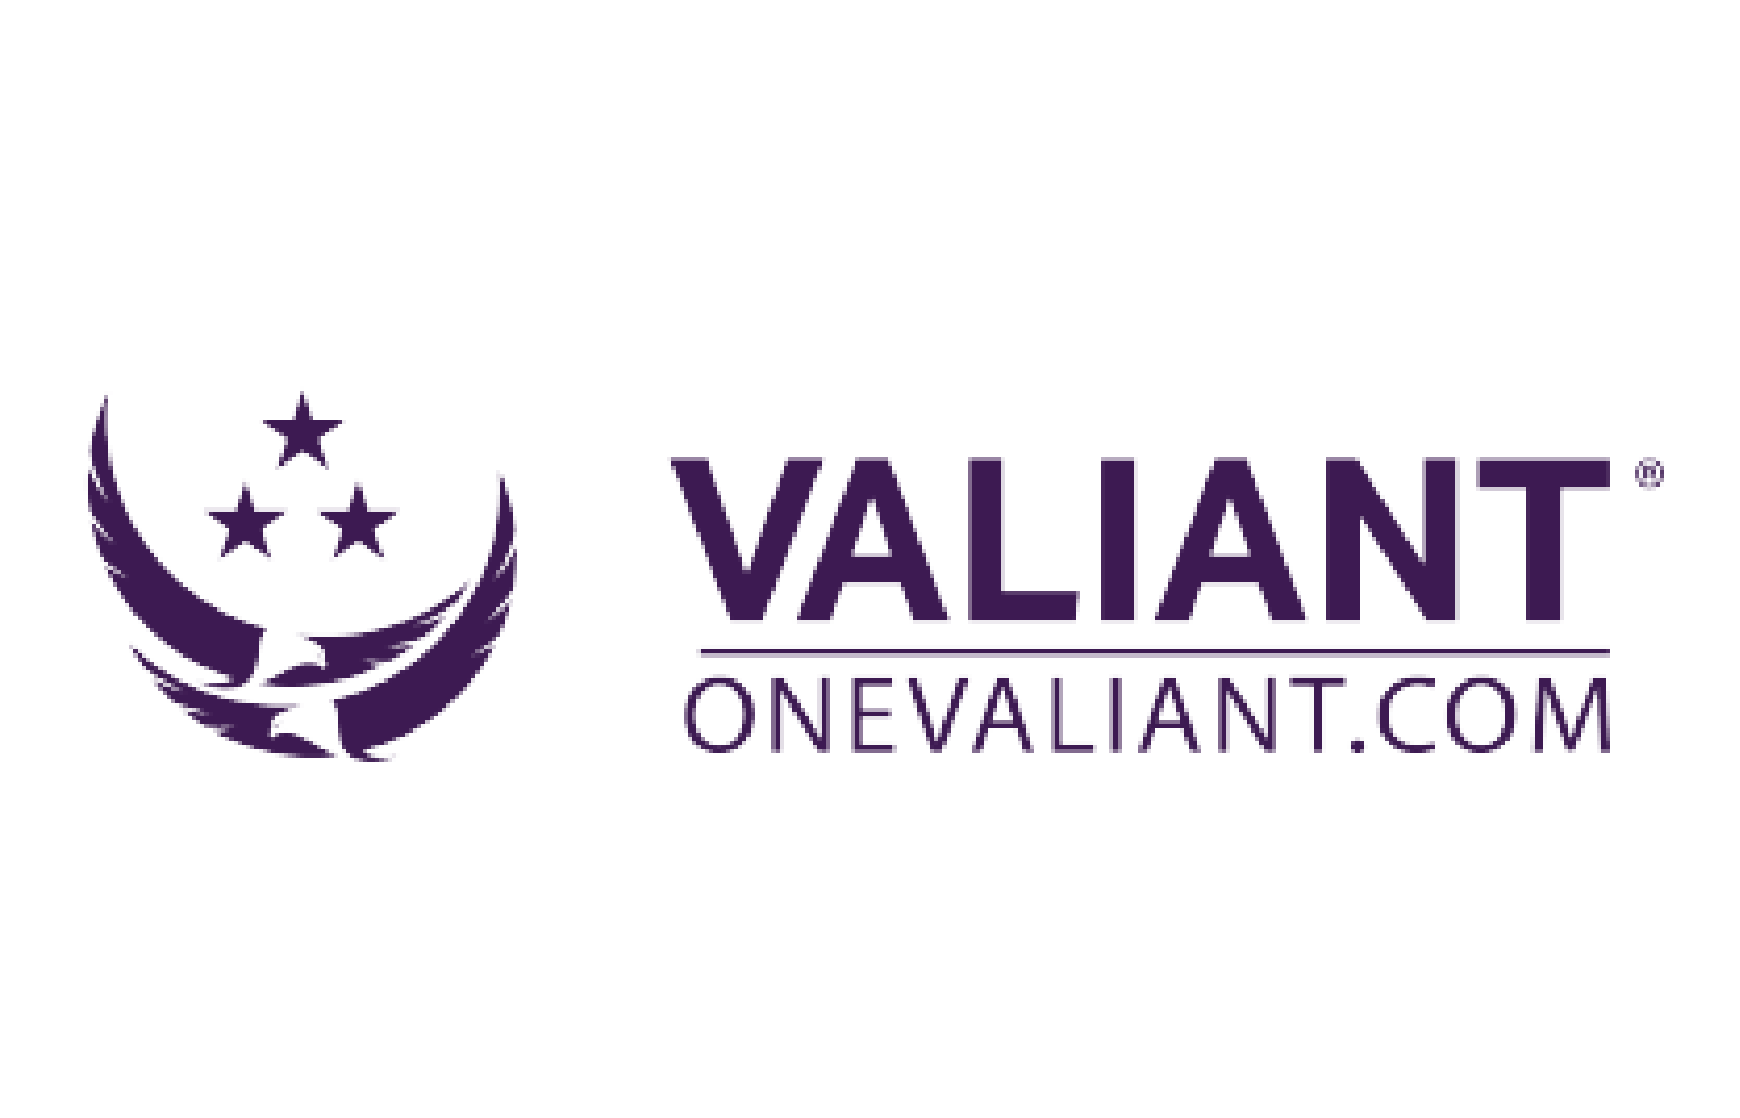 Logo of the company Valiant who is a client of Precision Talent Solutions.